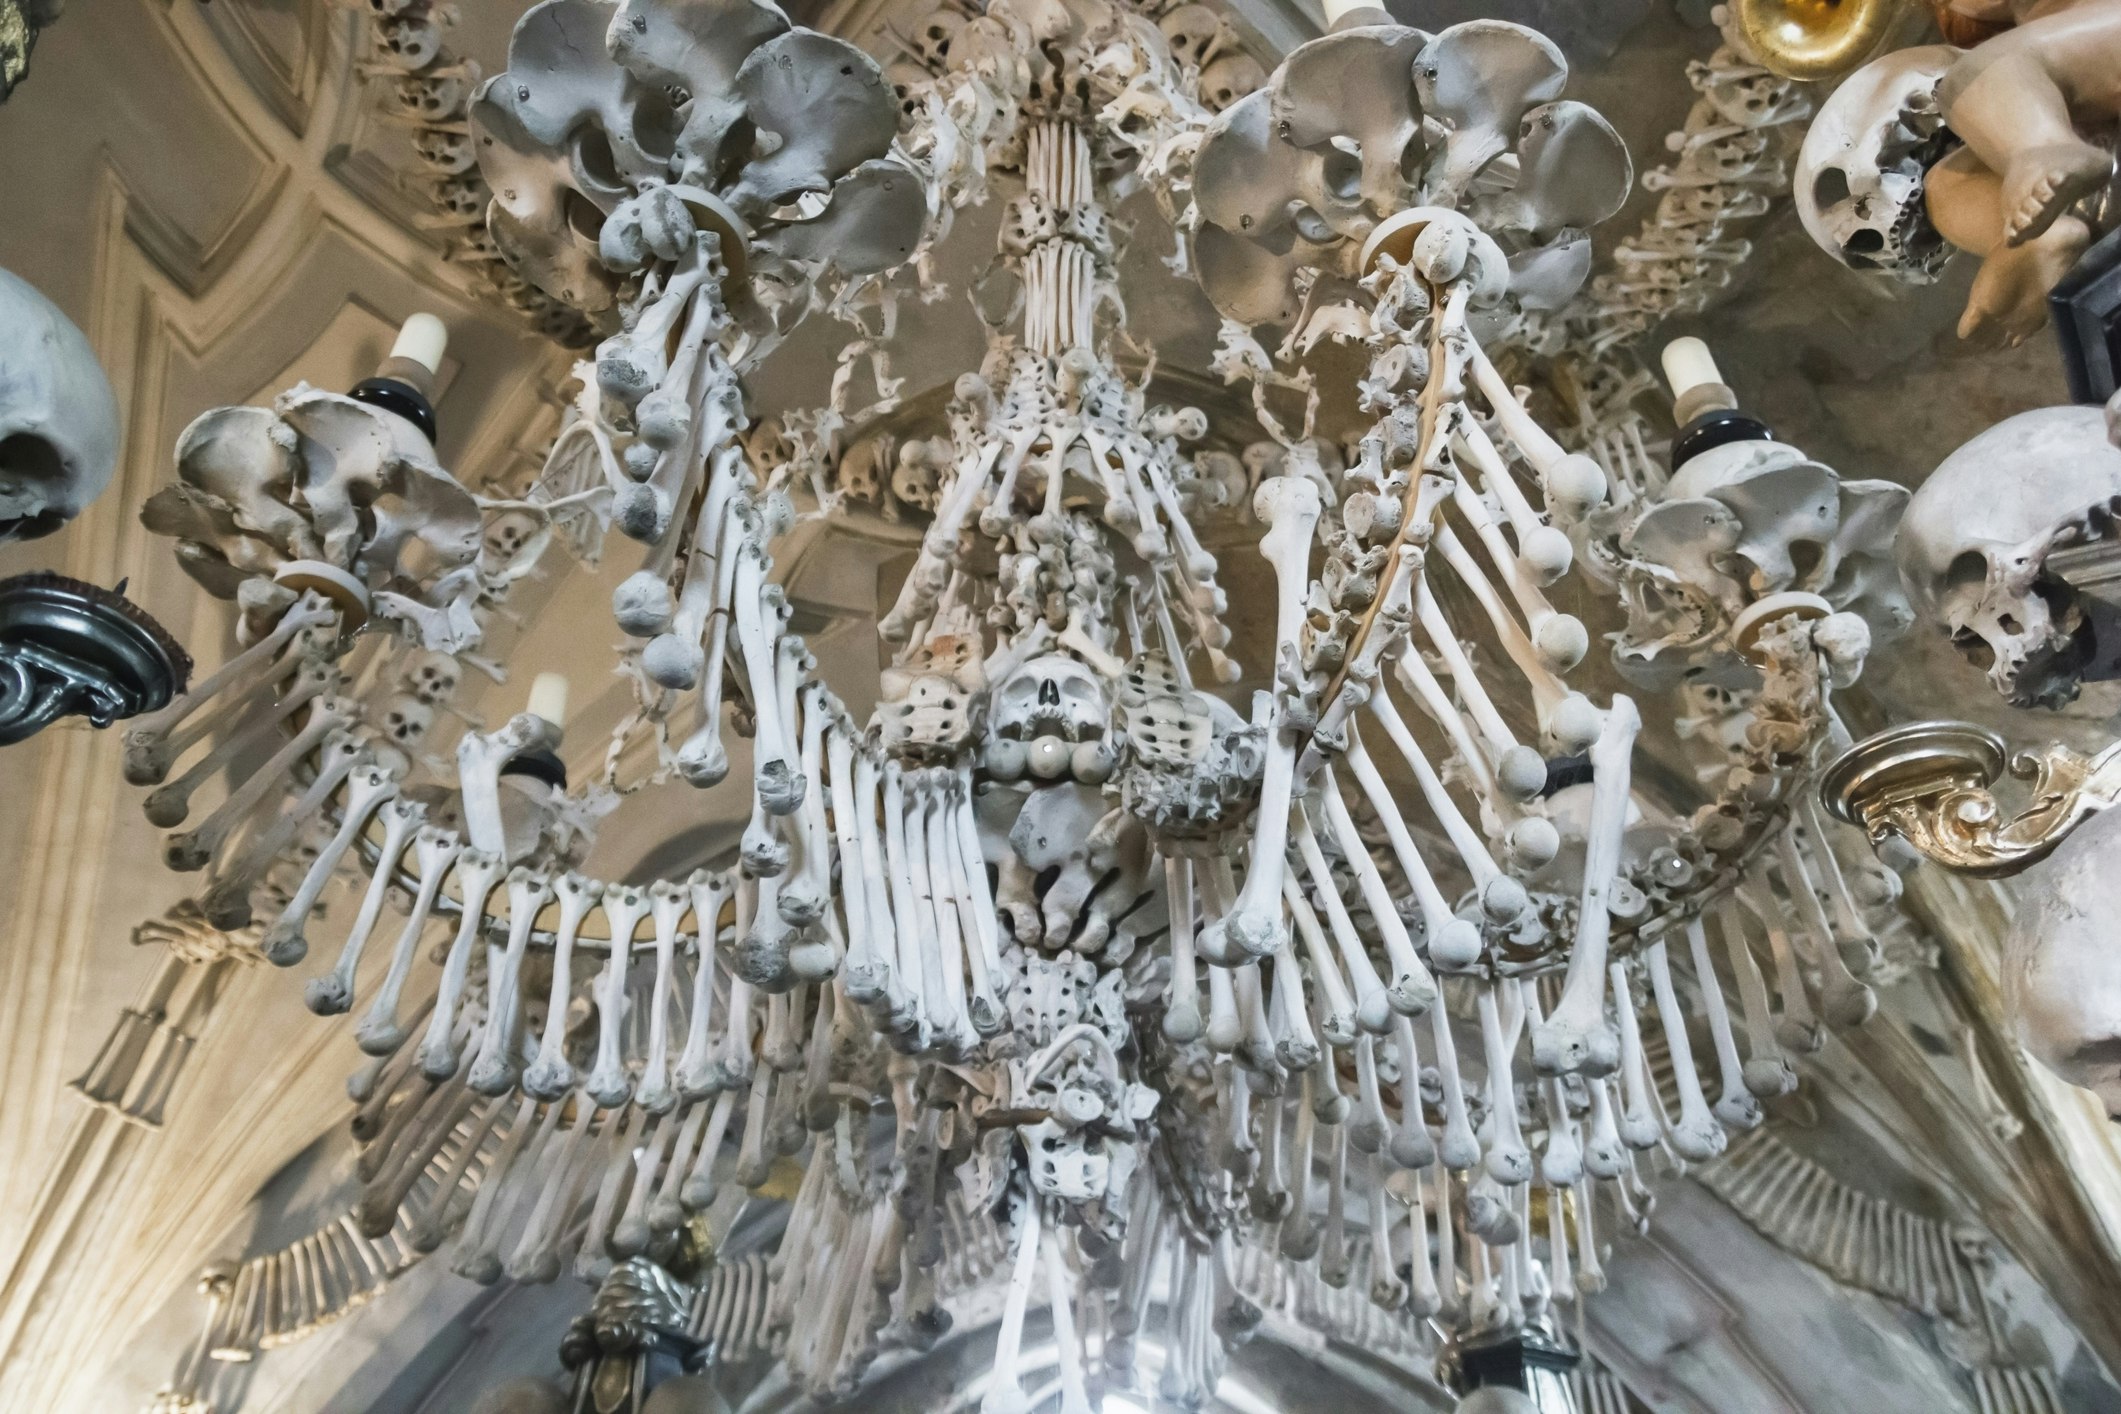 Kostnice Church in Kutna Hora with Ossuary interior decoration from human bones and skulls